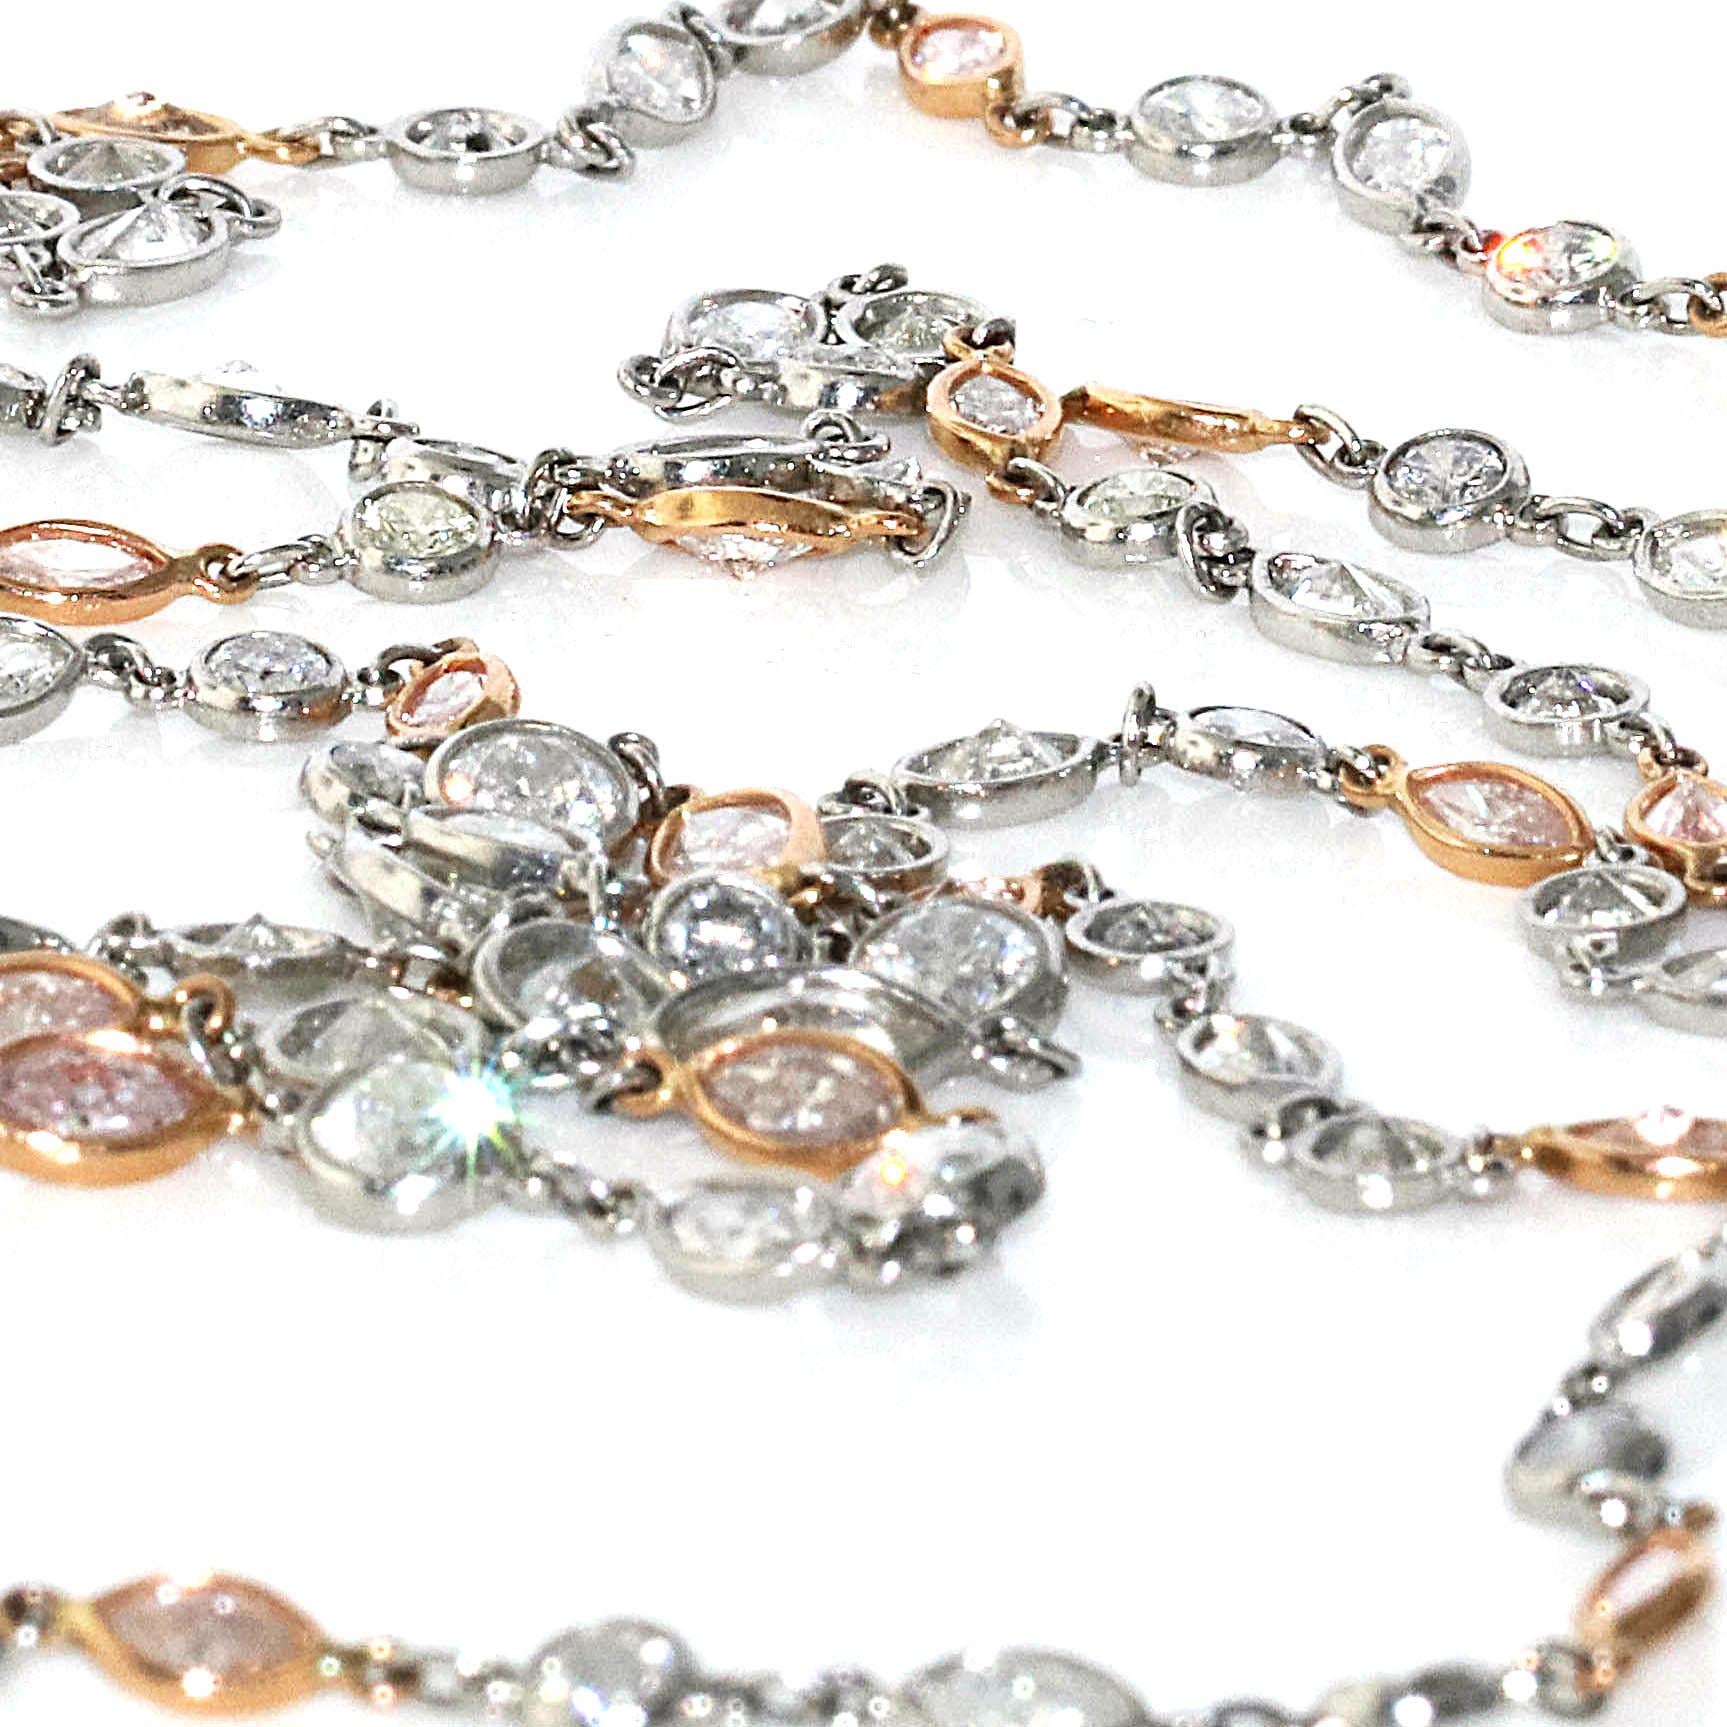 A one of a kind Pink and White Diamond by the yard necklace. This gorgeous necklace is set in both Platinum and 18kt Rose gold making this an extremely high quality piece that cannot be matched. Set among the white diamonds are natural pink